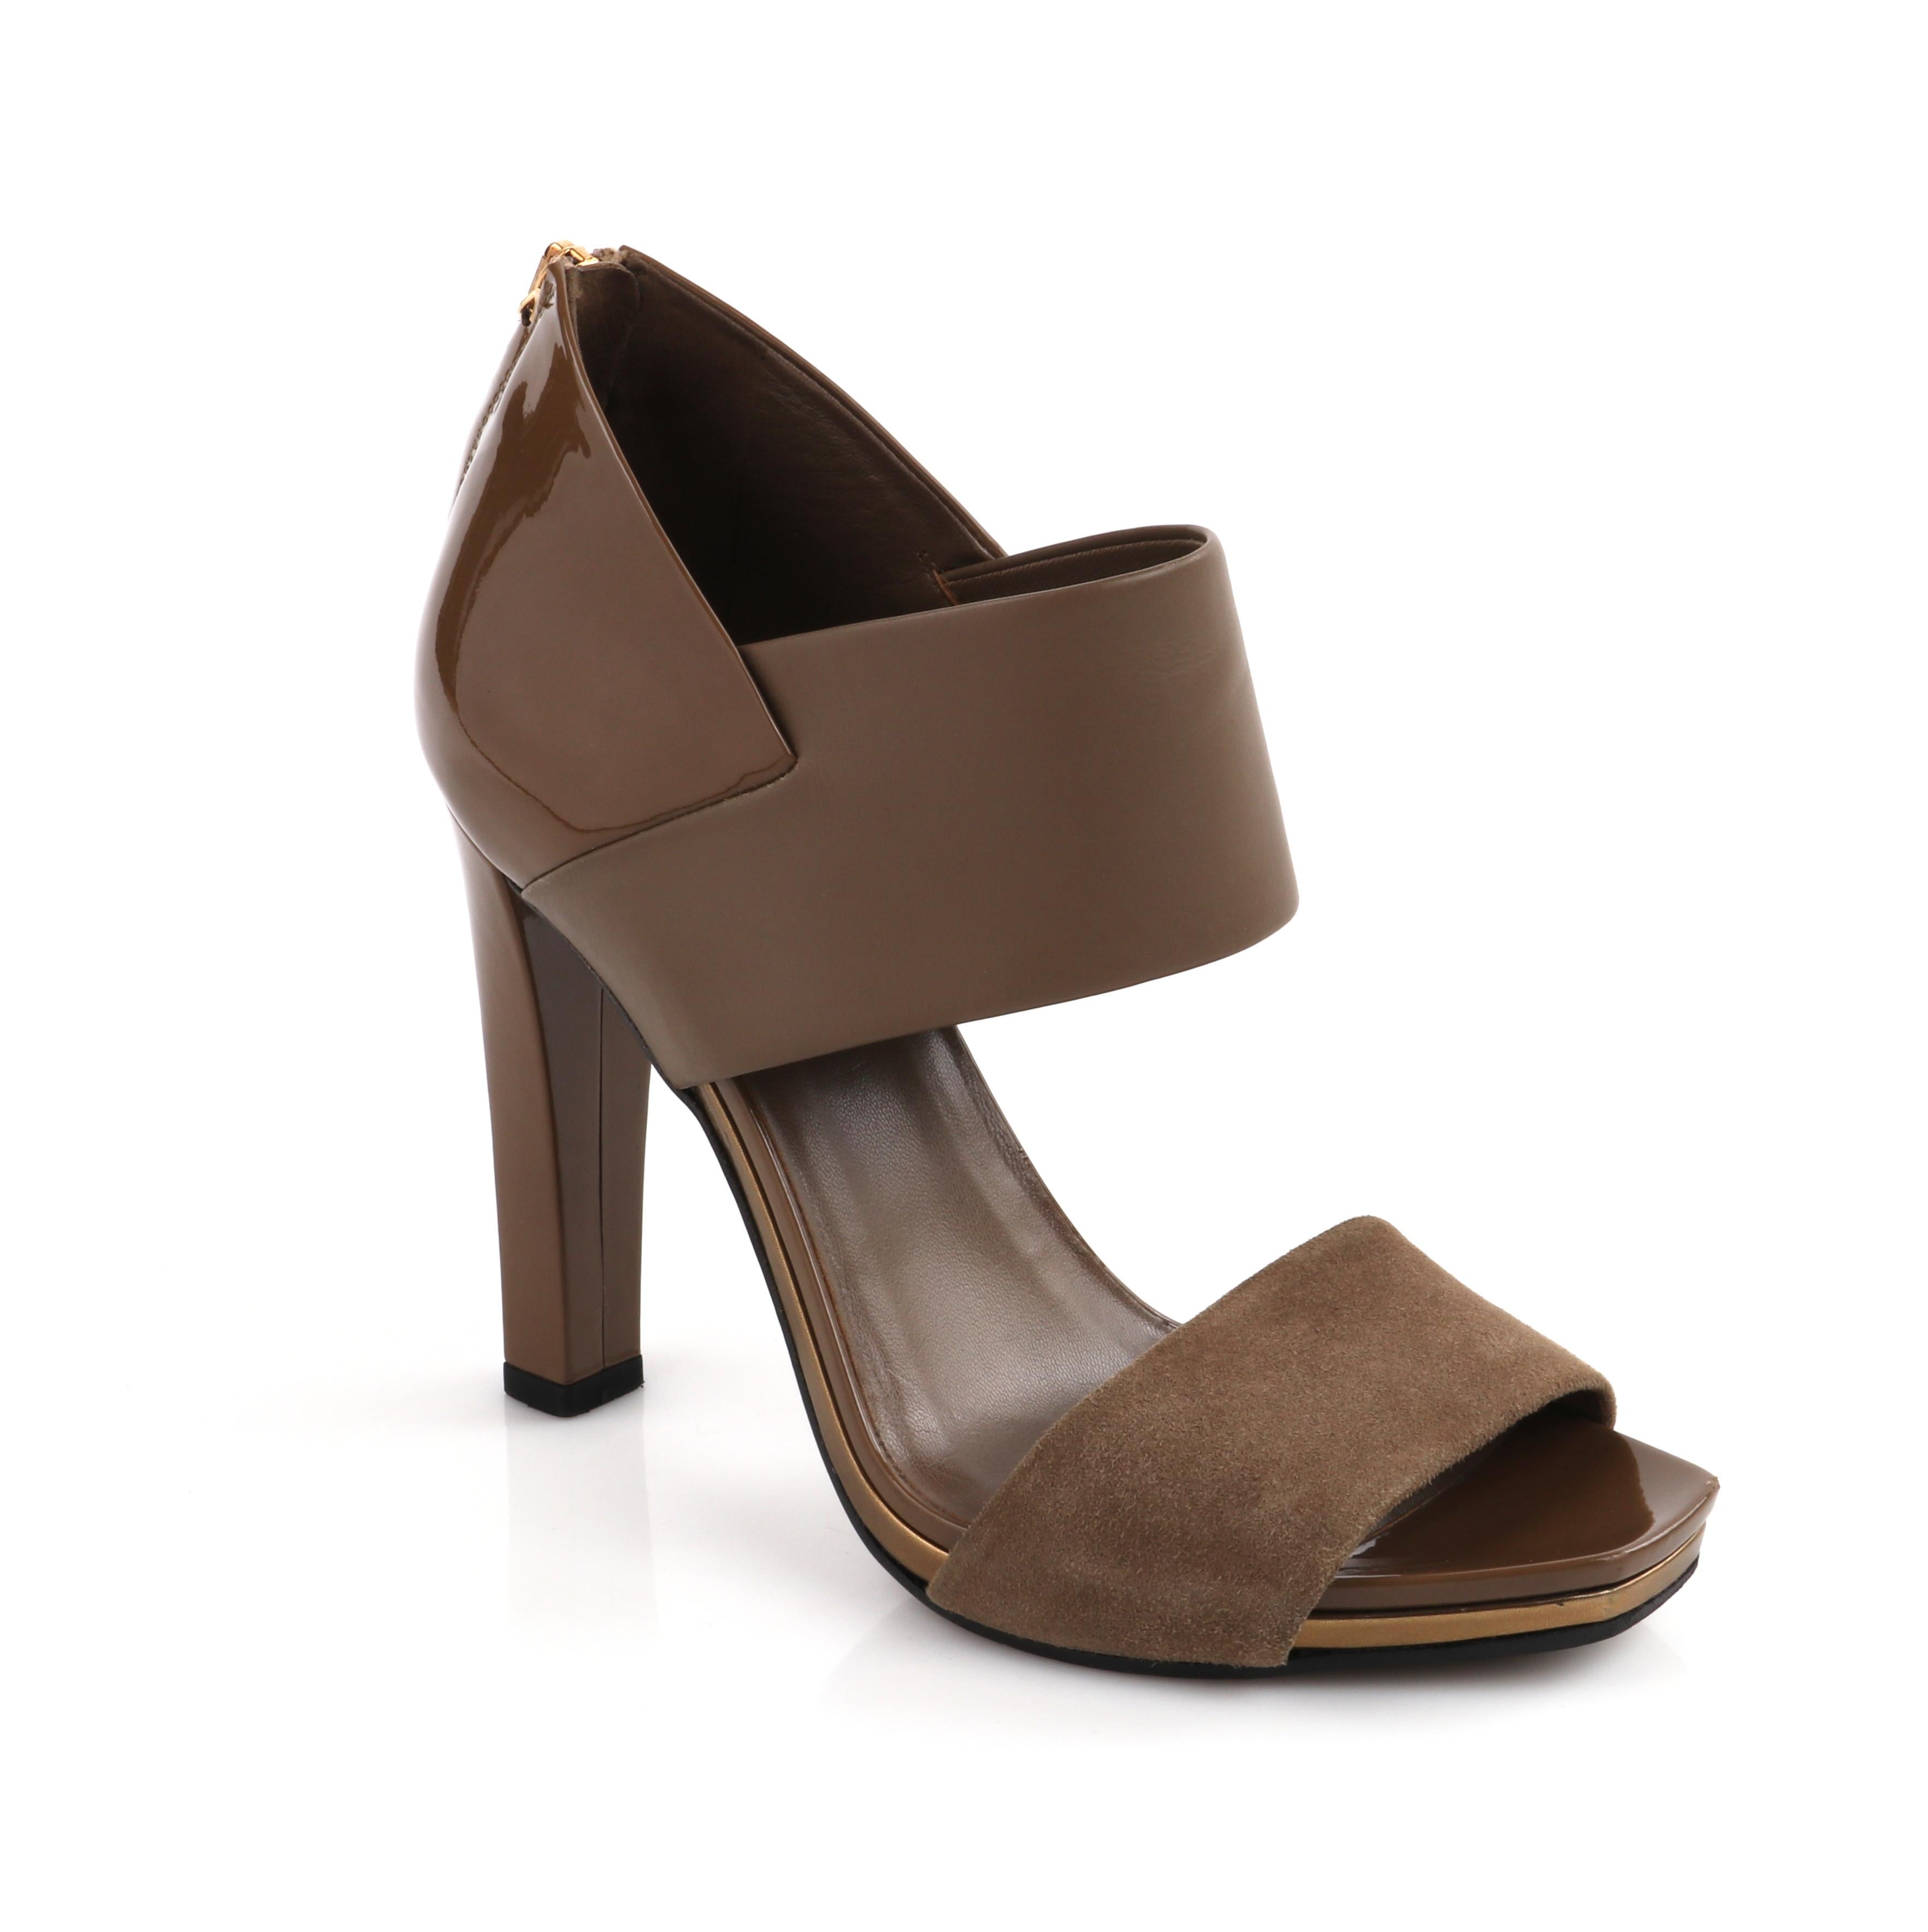 GUCCI Taupe Brown Patent Leather & Suede Vamp Open Toe Heel
 
Brand / Manufacturer: Gucci 
Marked Size: “37”
Style: Open toe heel
Color(s): Shades of taupe brown
Unmarked Materials (feel of): Suede (vamp); leather (top strap, insole); patent leather